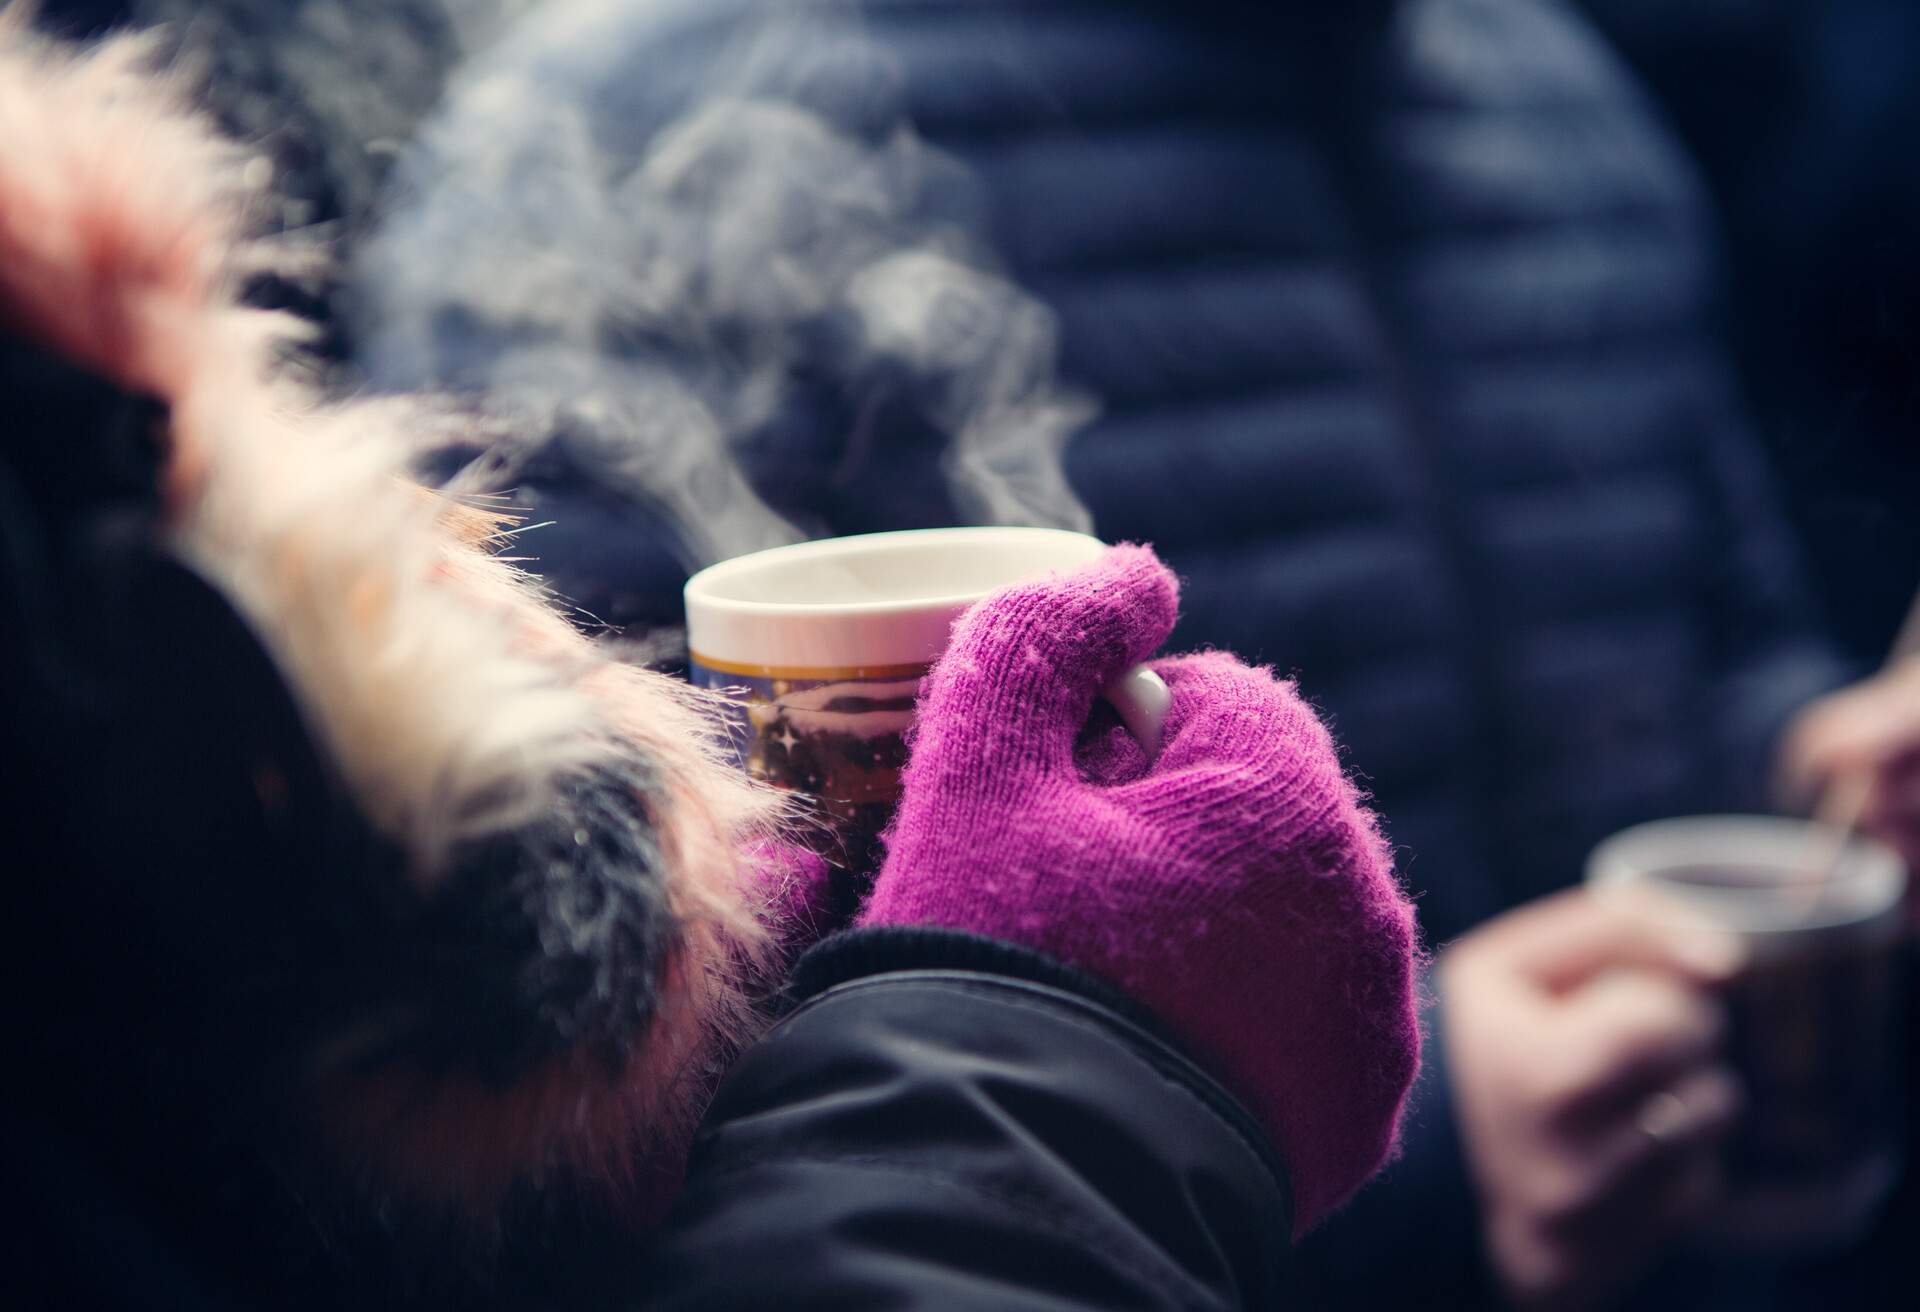 A person wearing winter jacket with purple gloves, holding a steaming mug of hot drink.